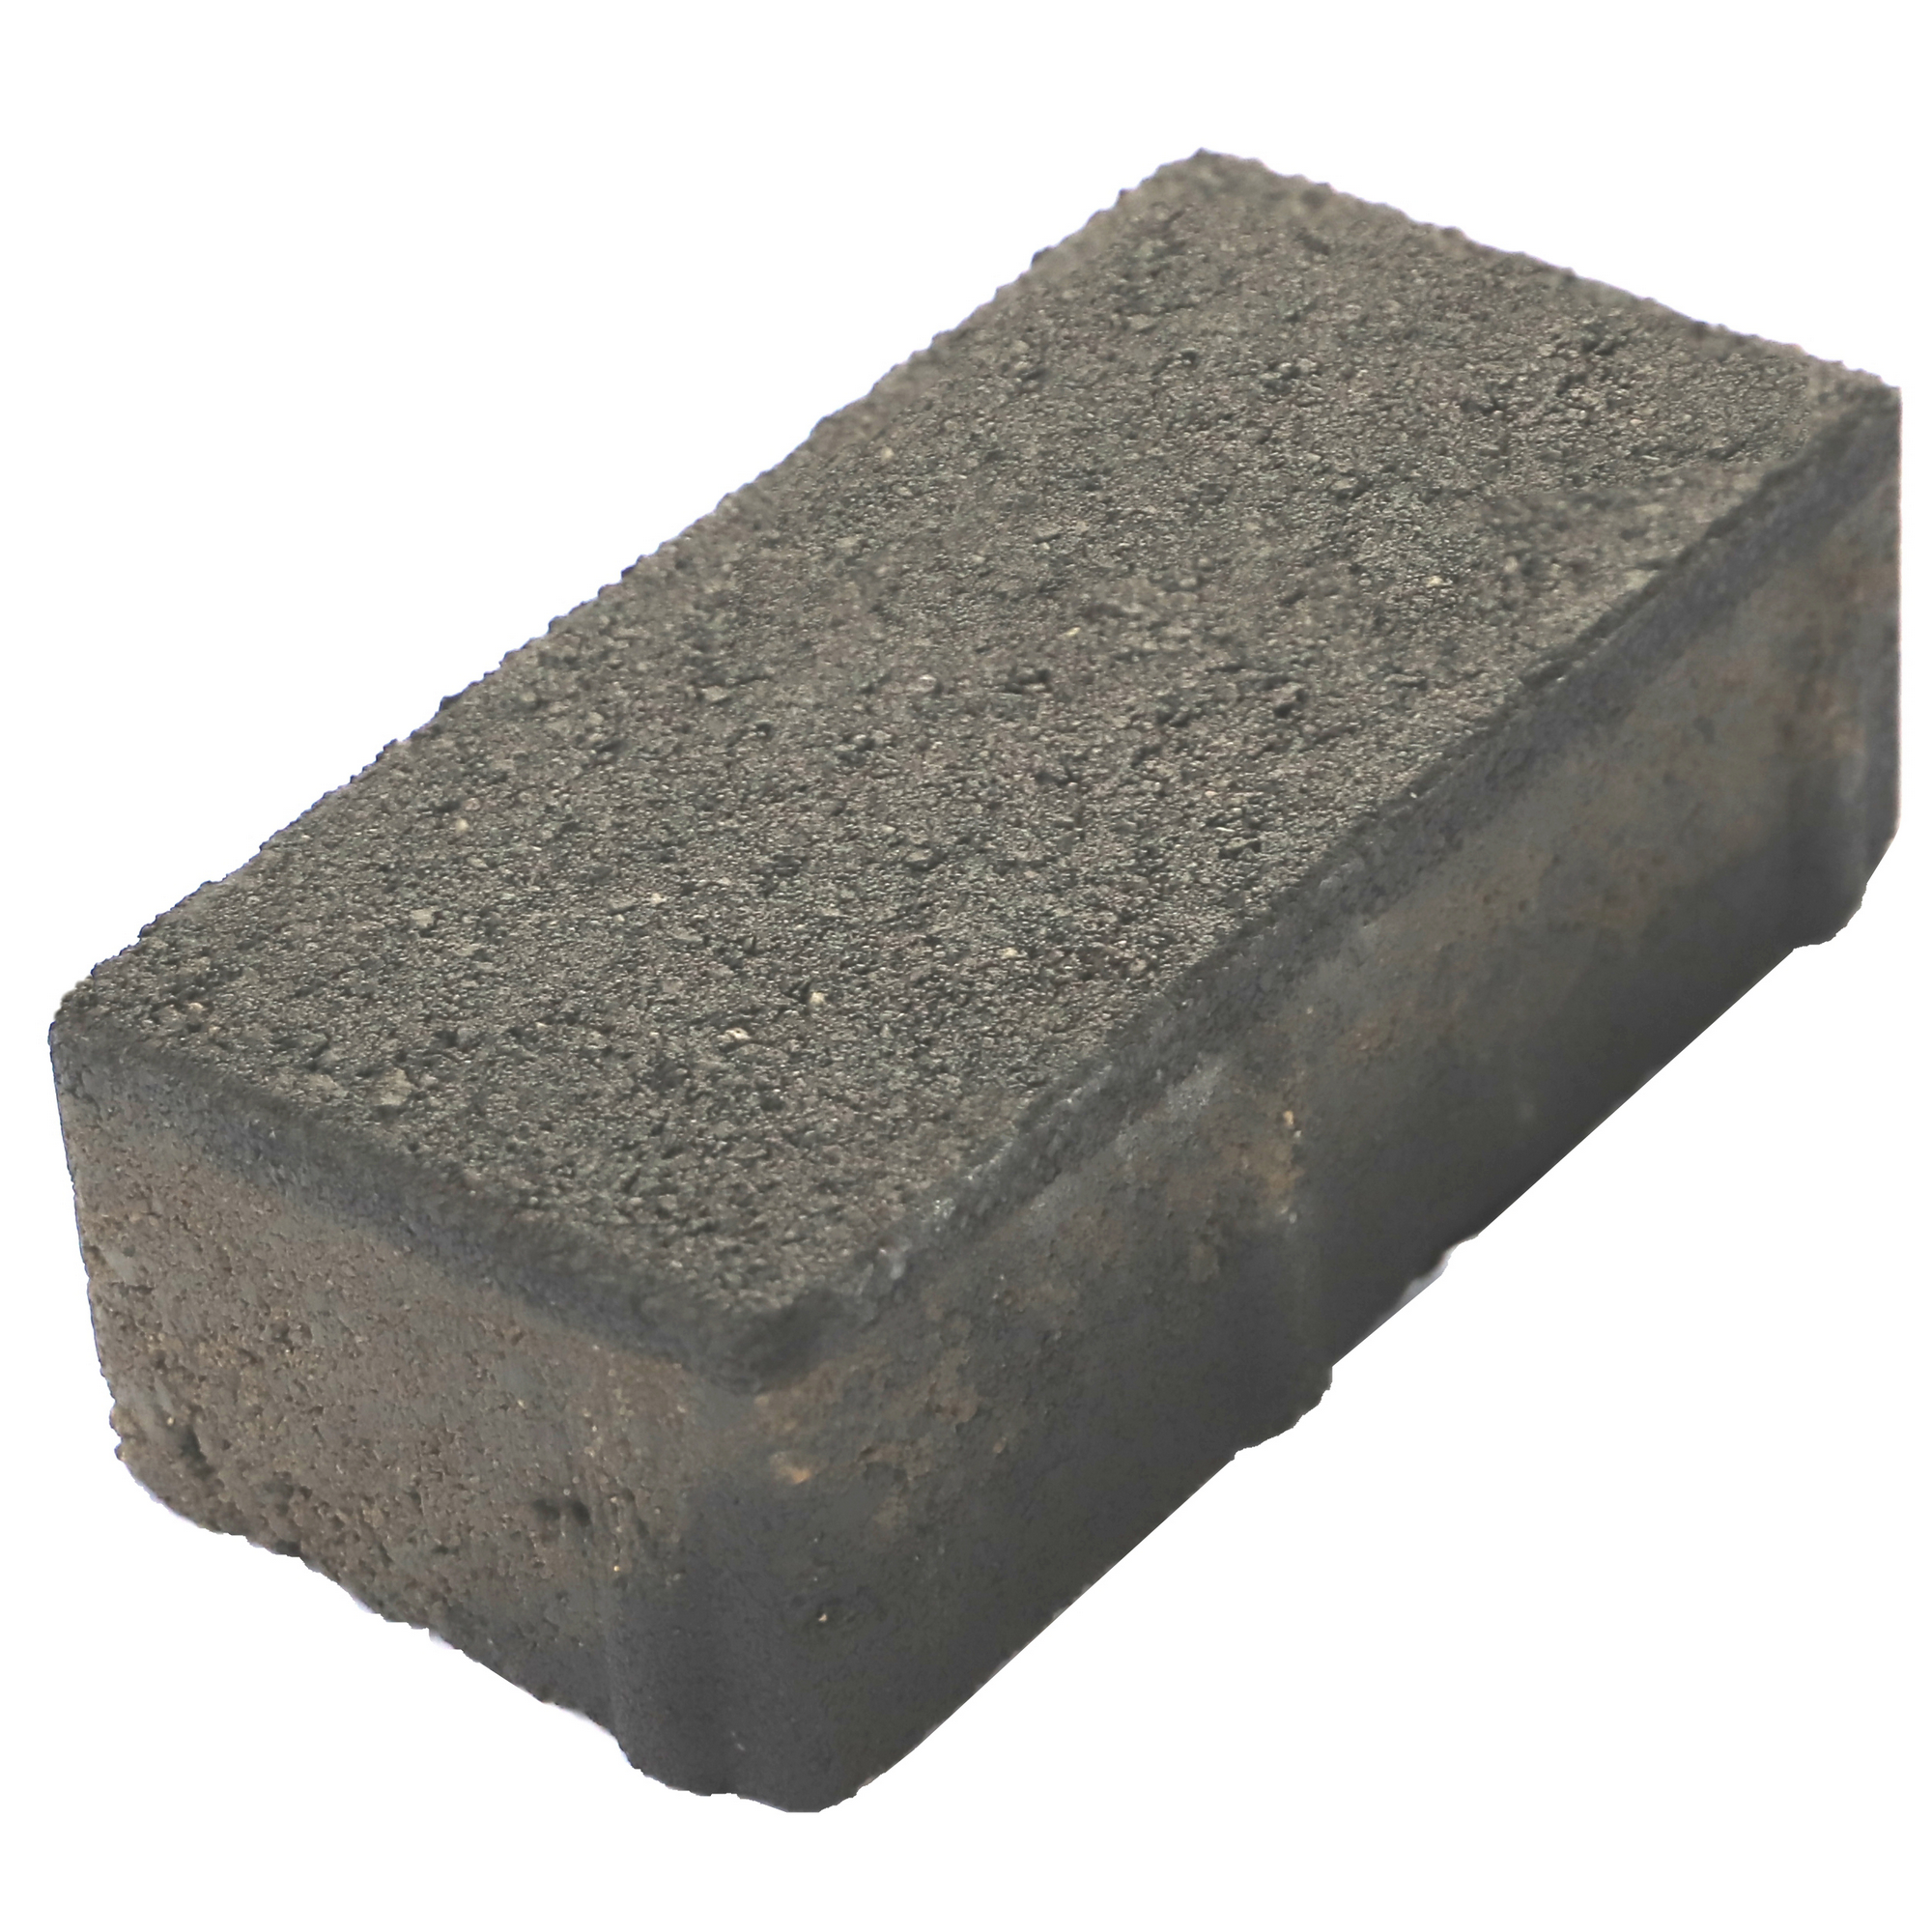 Pflasterstein Beton anthrazit 20 x 10 x 6 cm + product picture